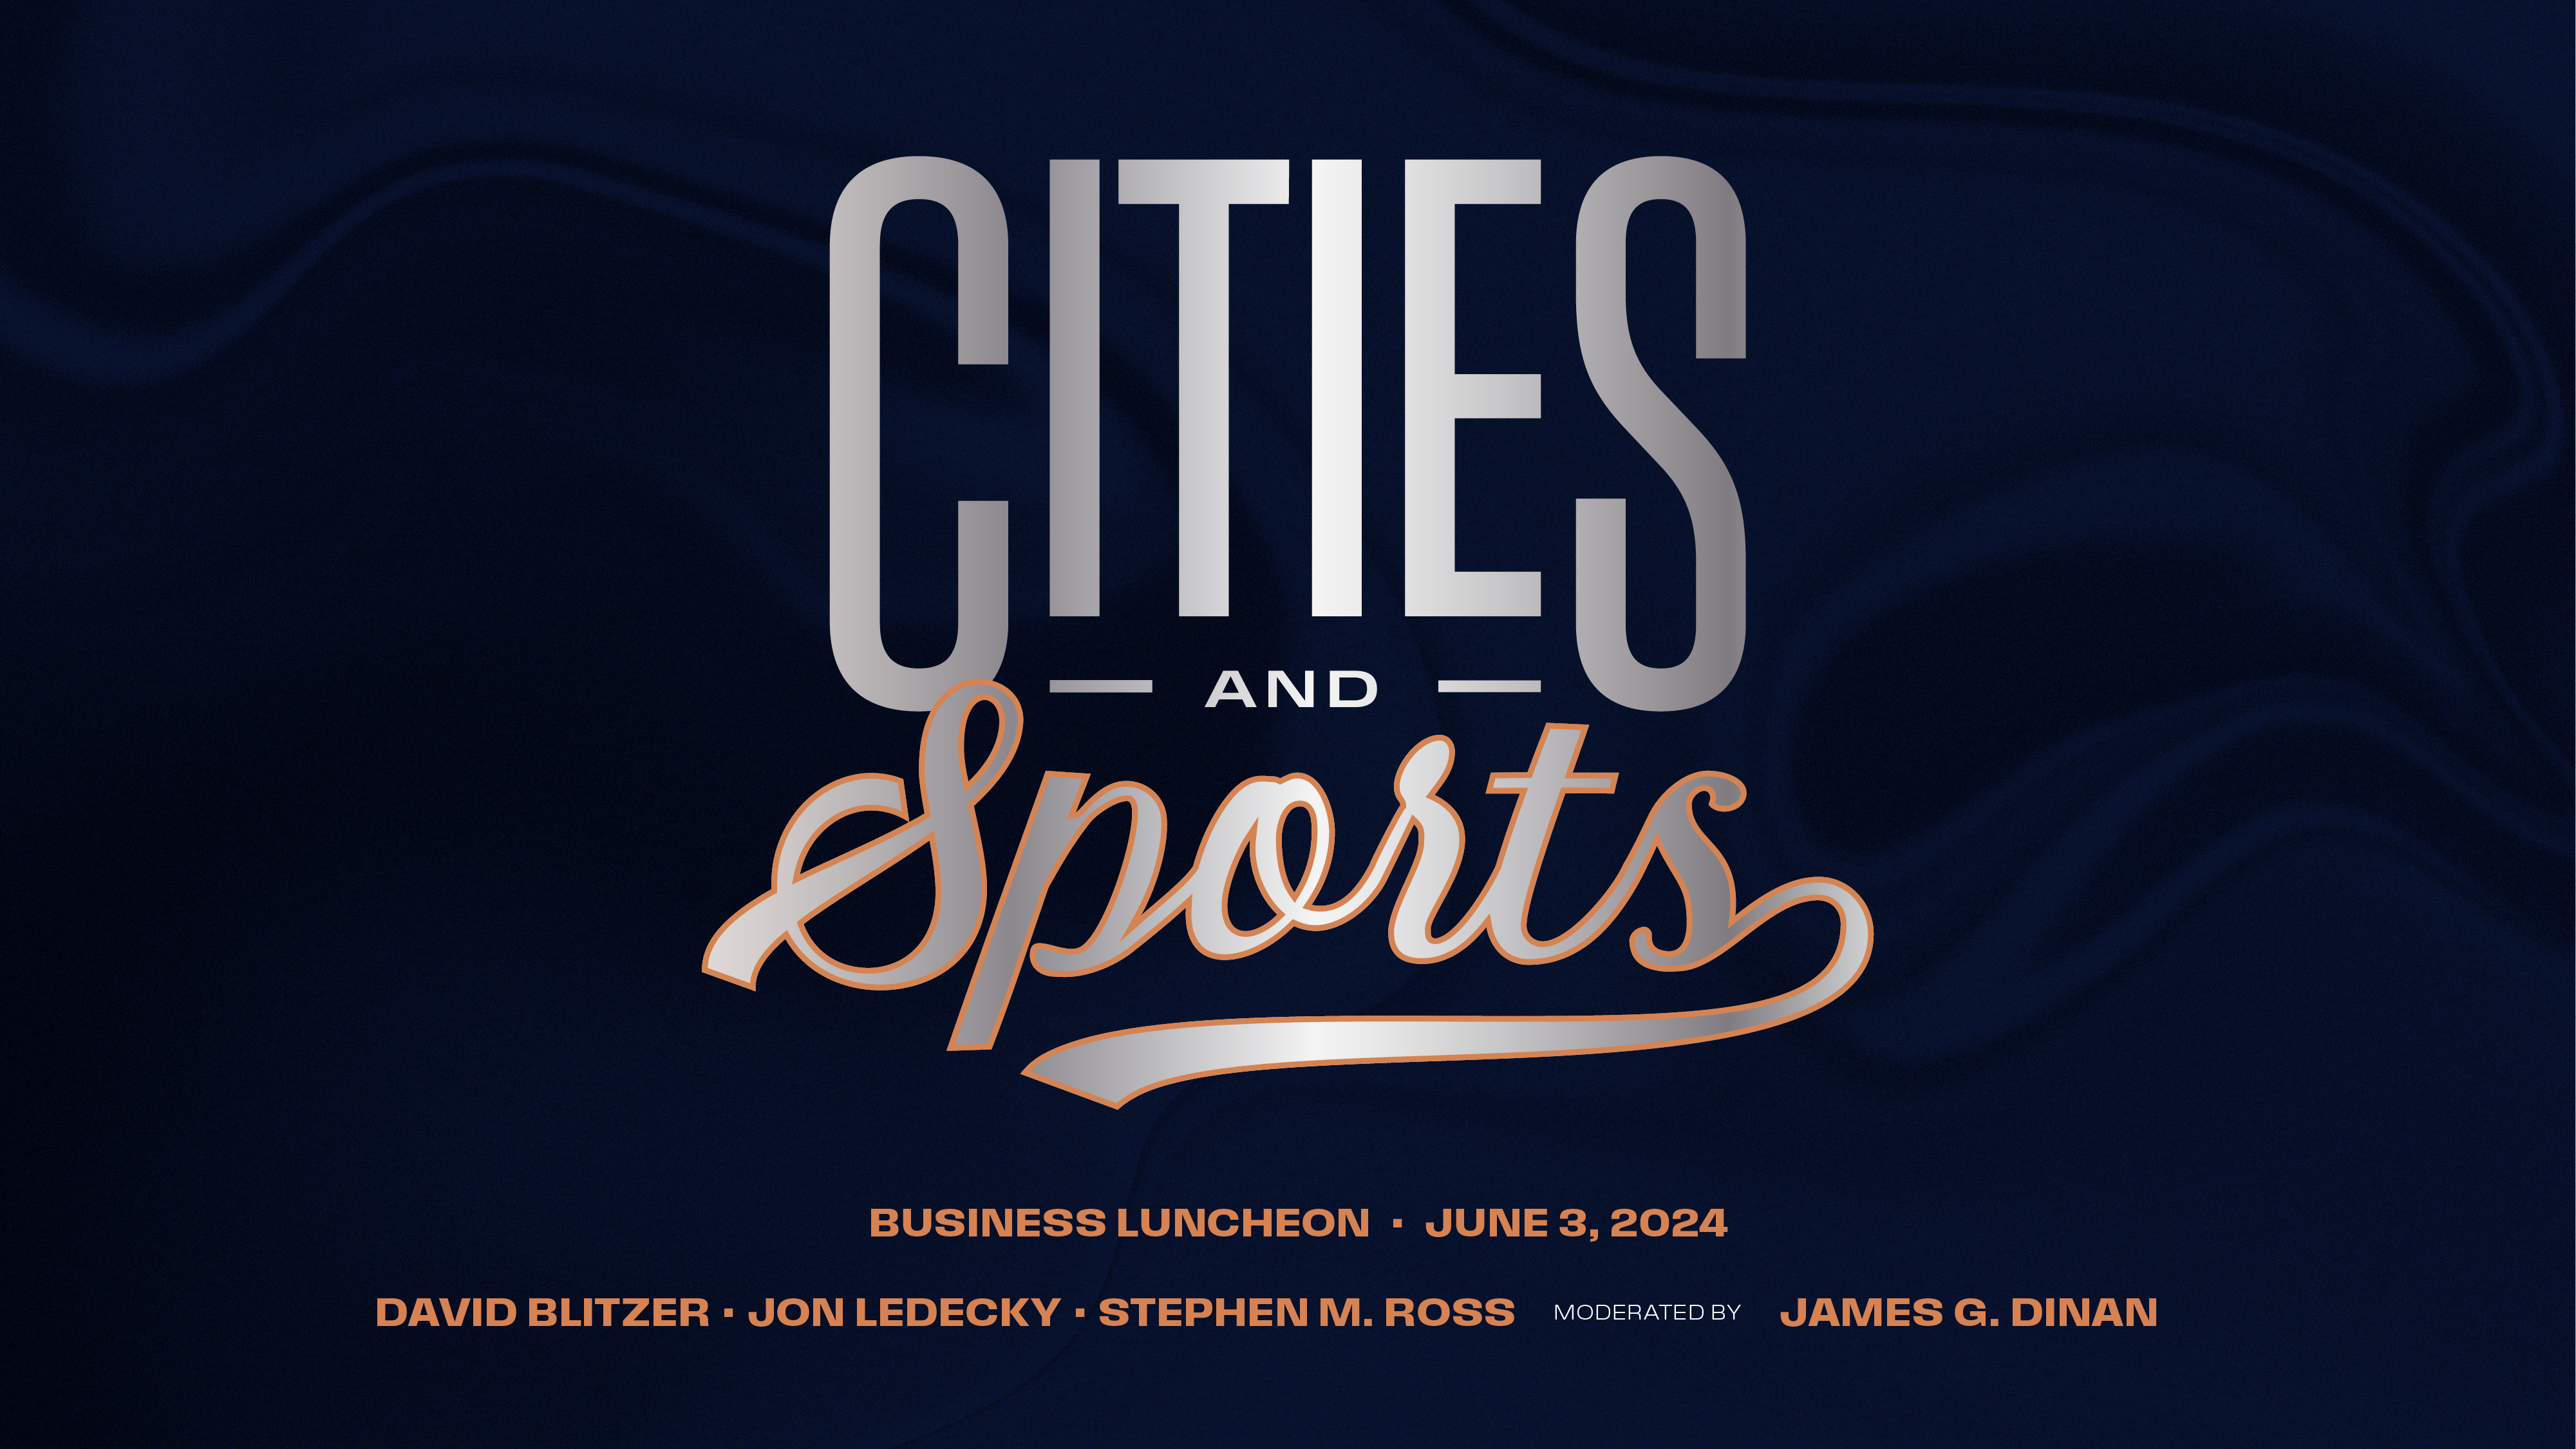 Cities and Sports Business Luncheon on June 3rd featuring David Blitzer, Jon Ledecky, Stephen M. Ross, and James G. Dinan